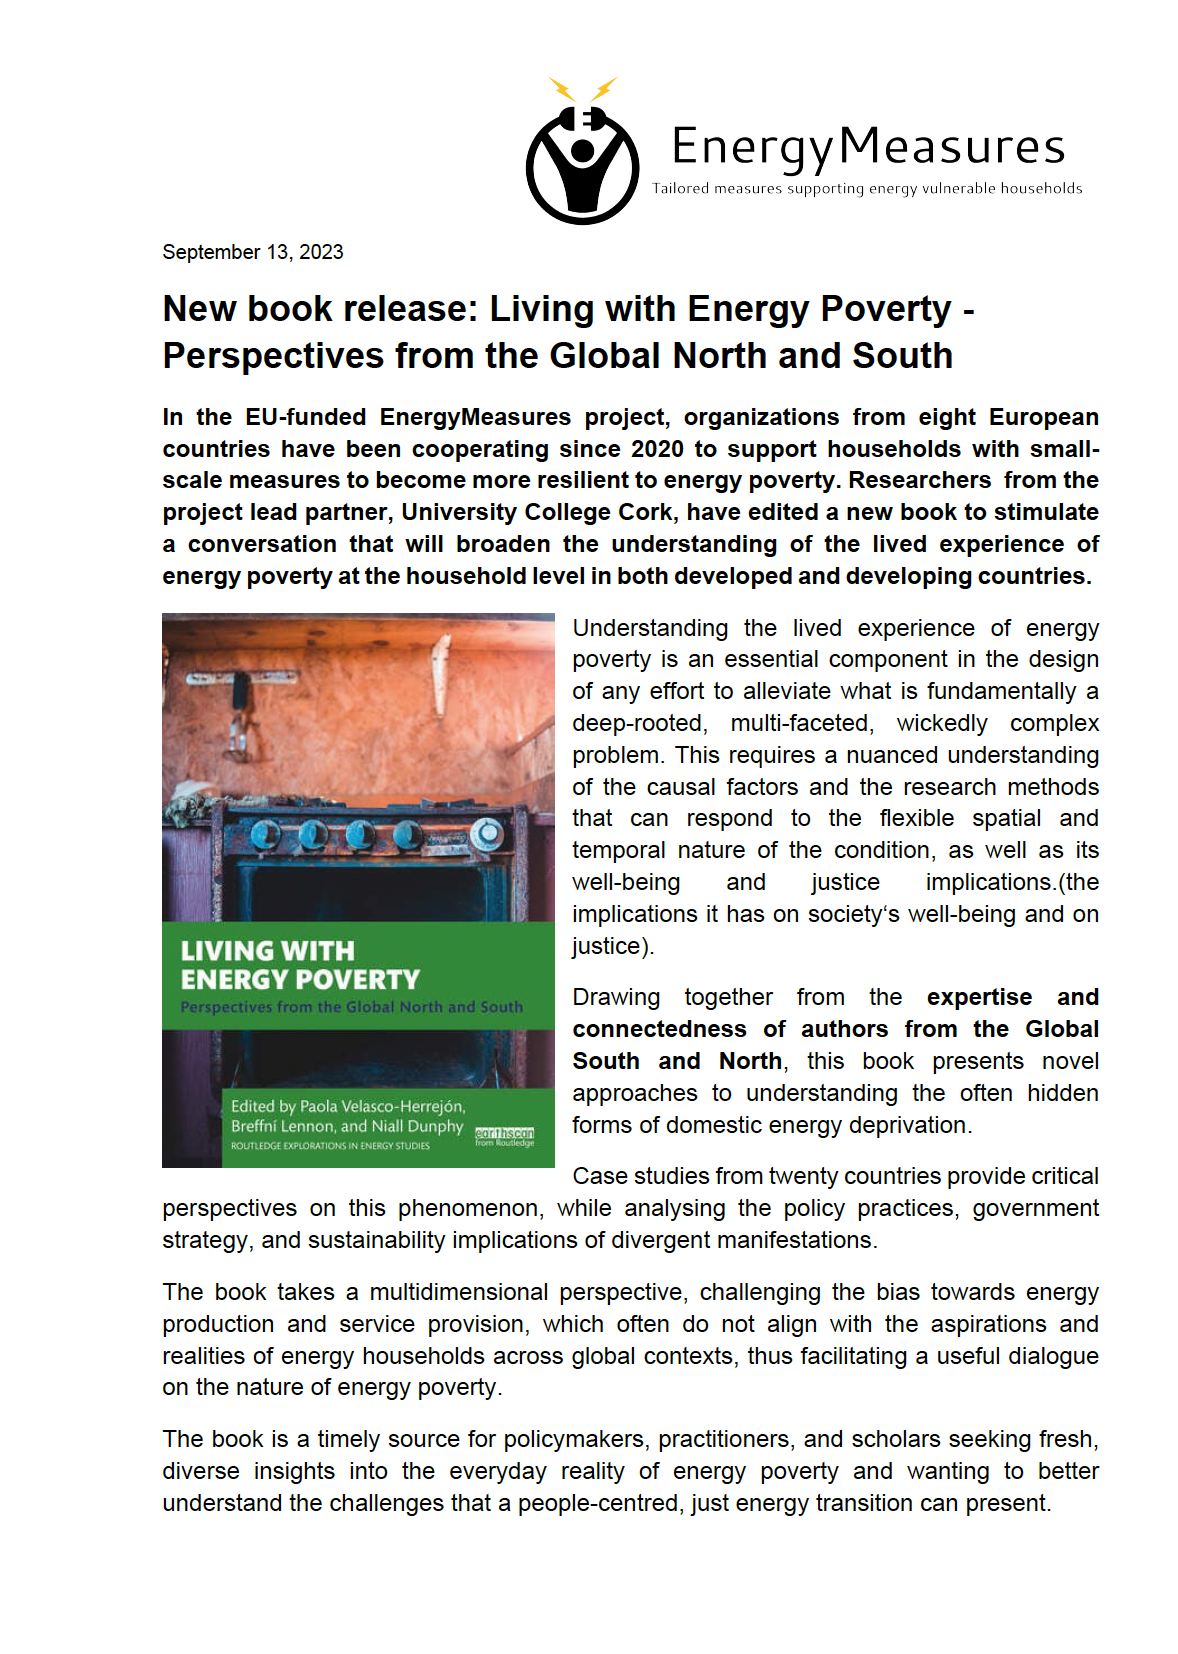 New book release: Living with Energy Poverty - Perspectives from the Global North and South